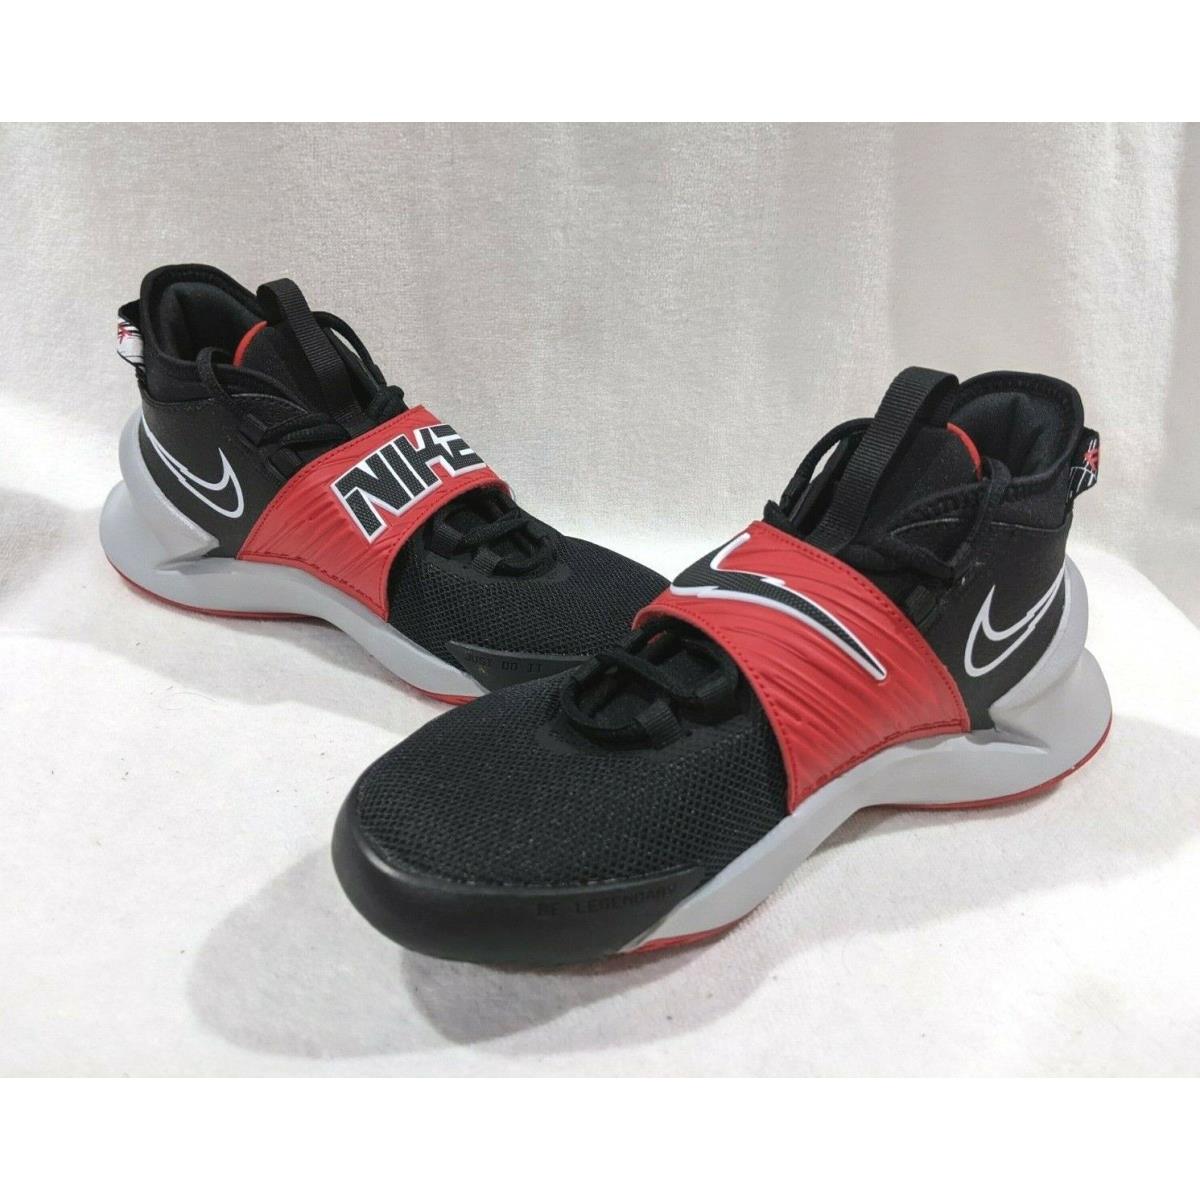 Nike Future Court 3 GS Black/white/red Boys Sneakers-size 4/5Y CT2866-008